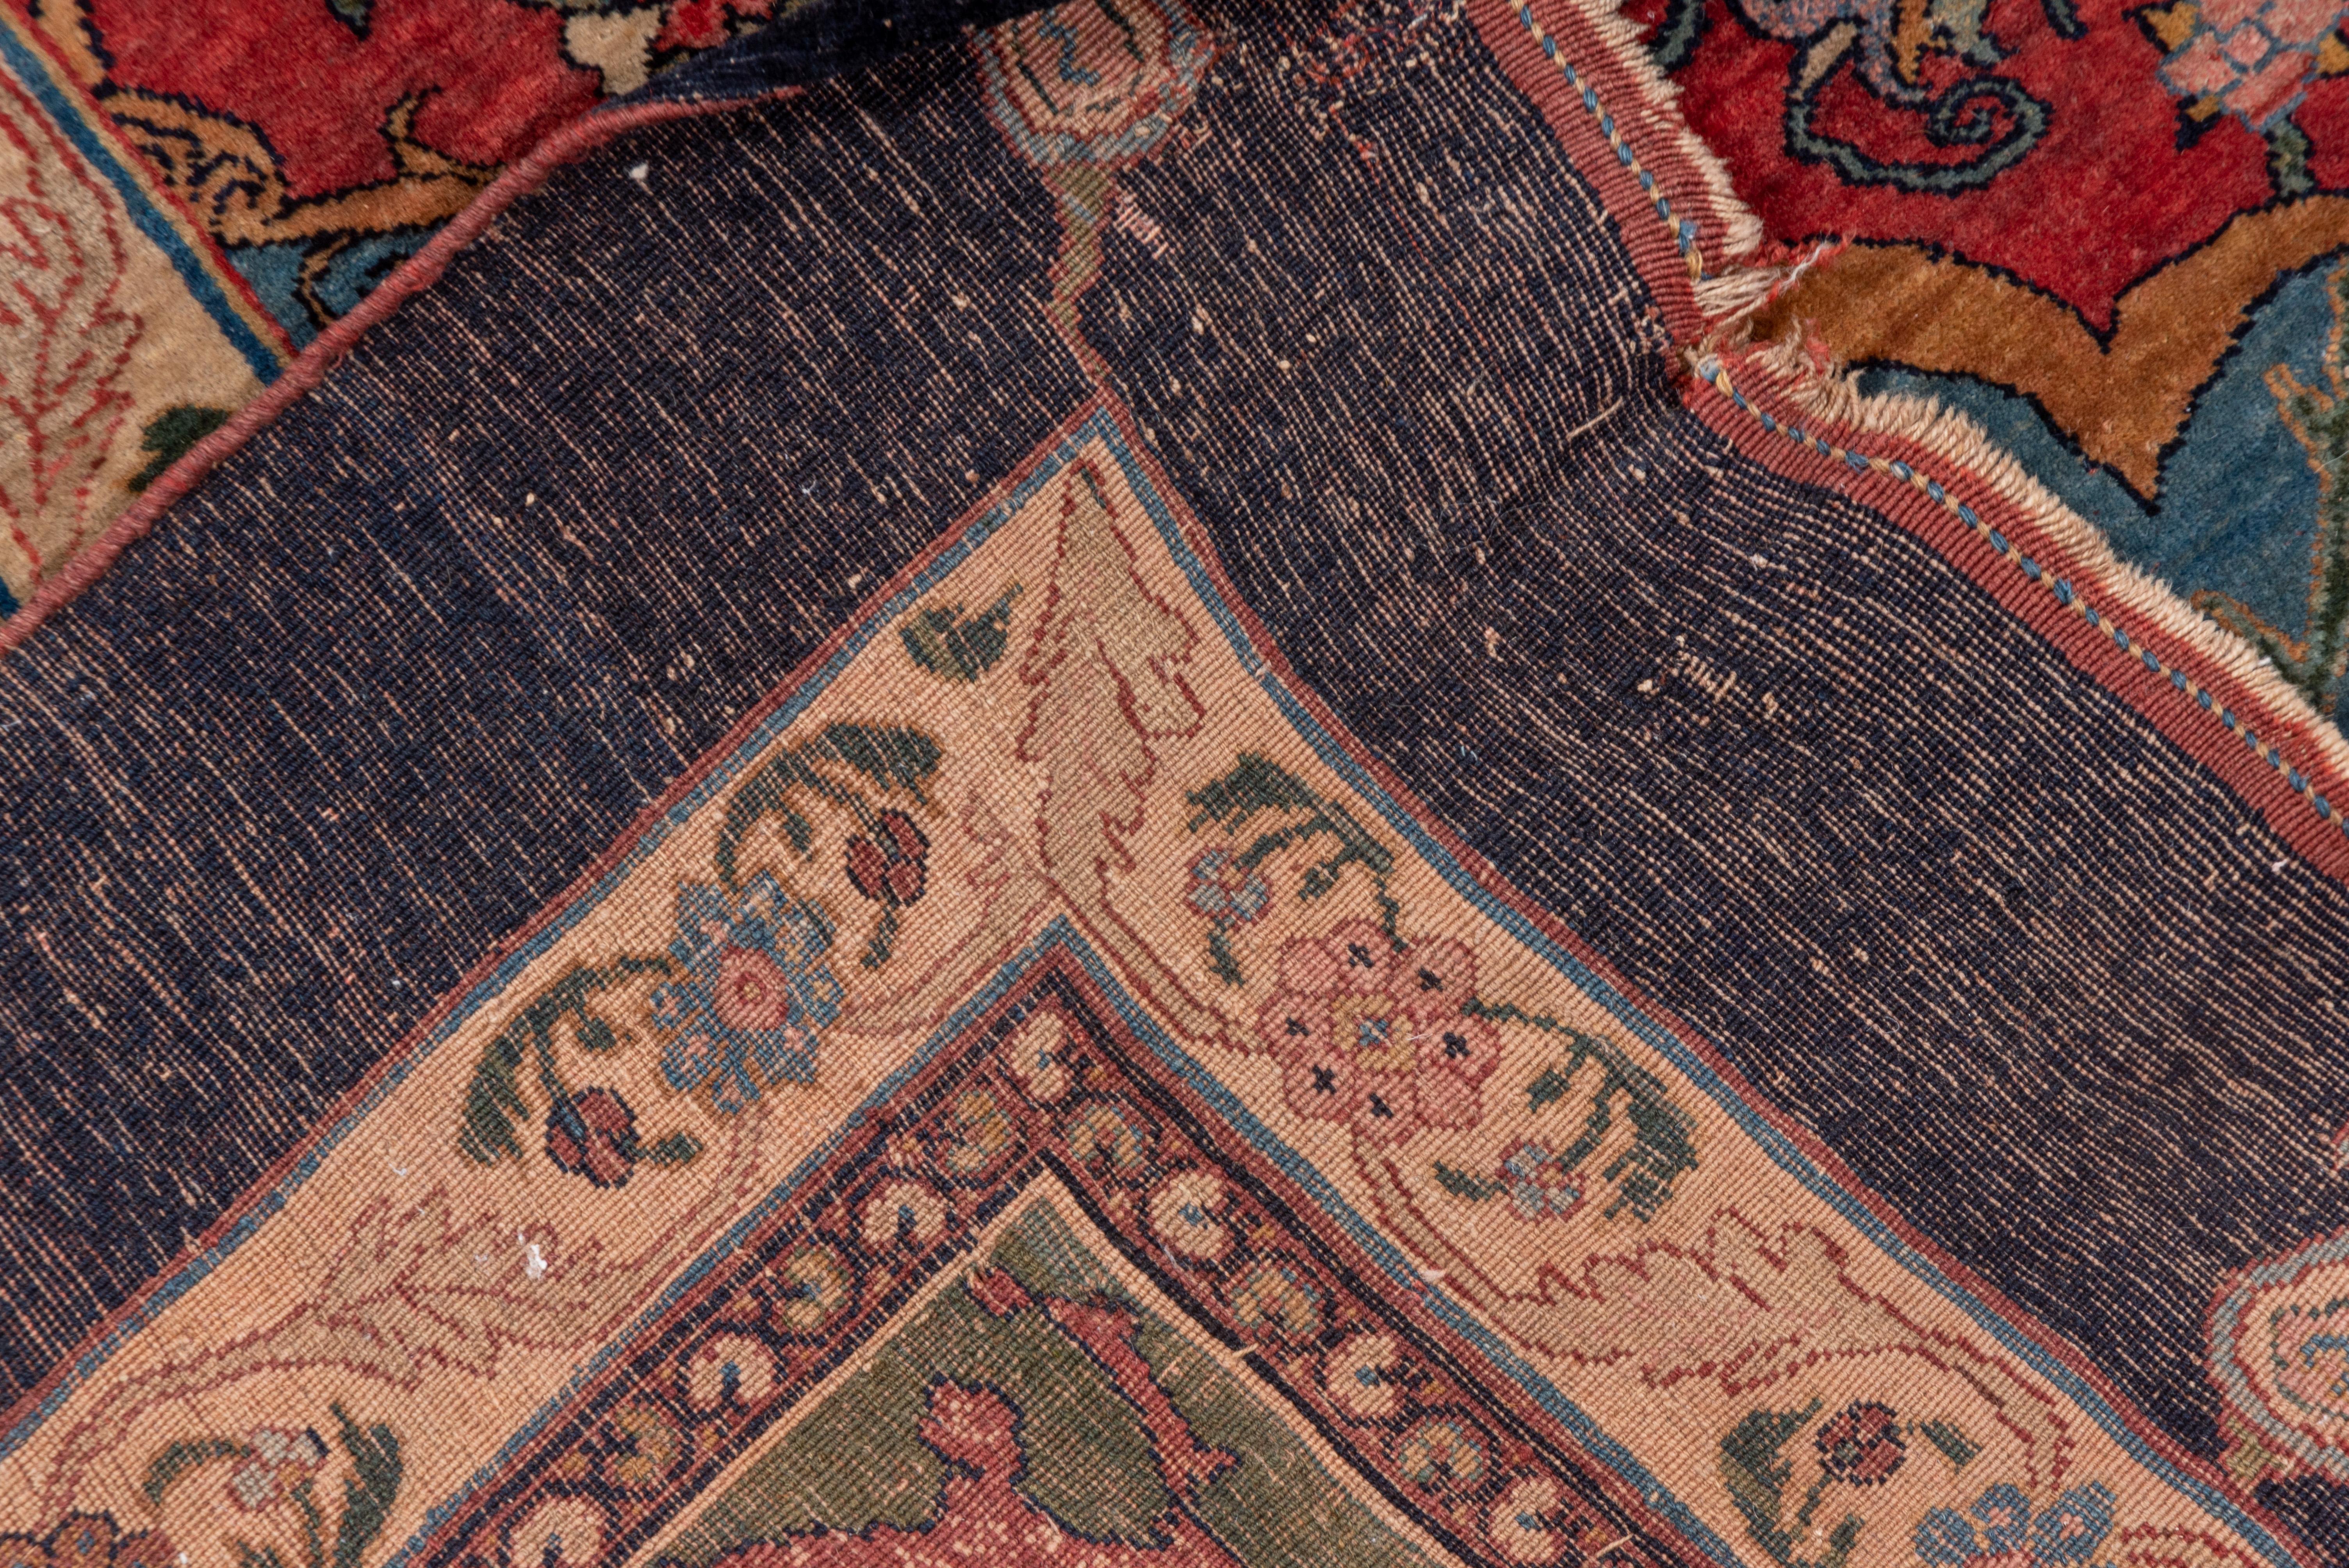 Wool Fine Antique Bidjar Carpet with Incredible Colors and Details, Unusual Border For Sale